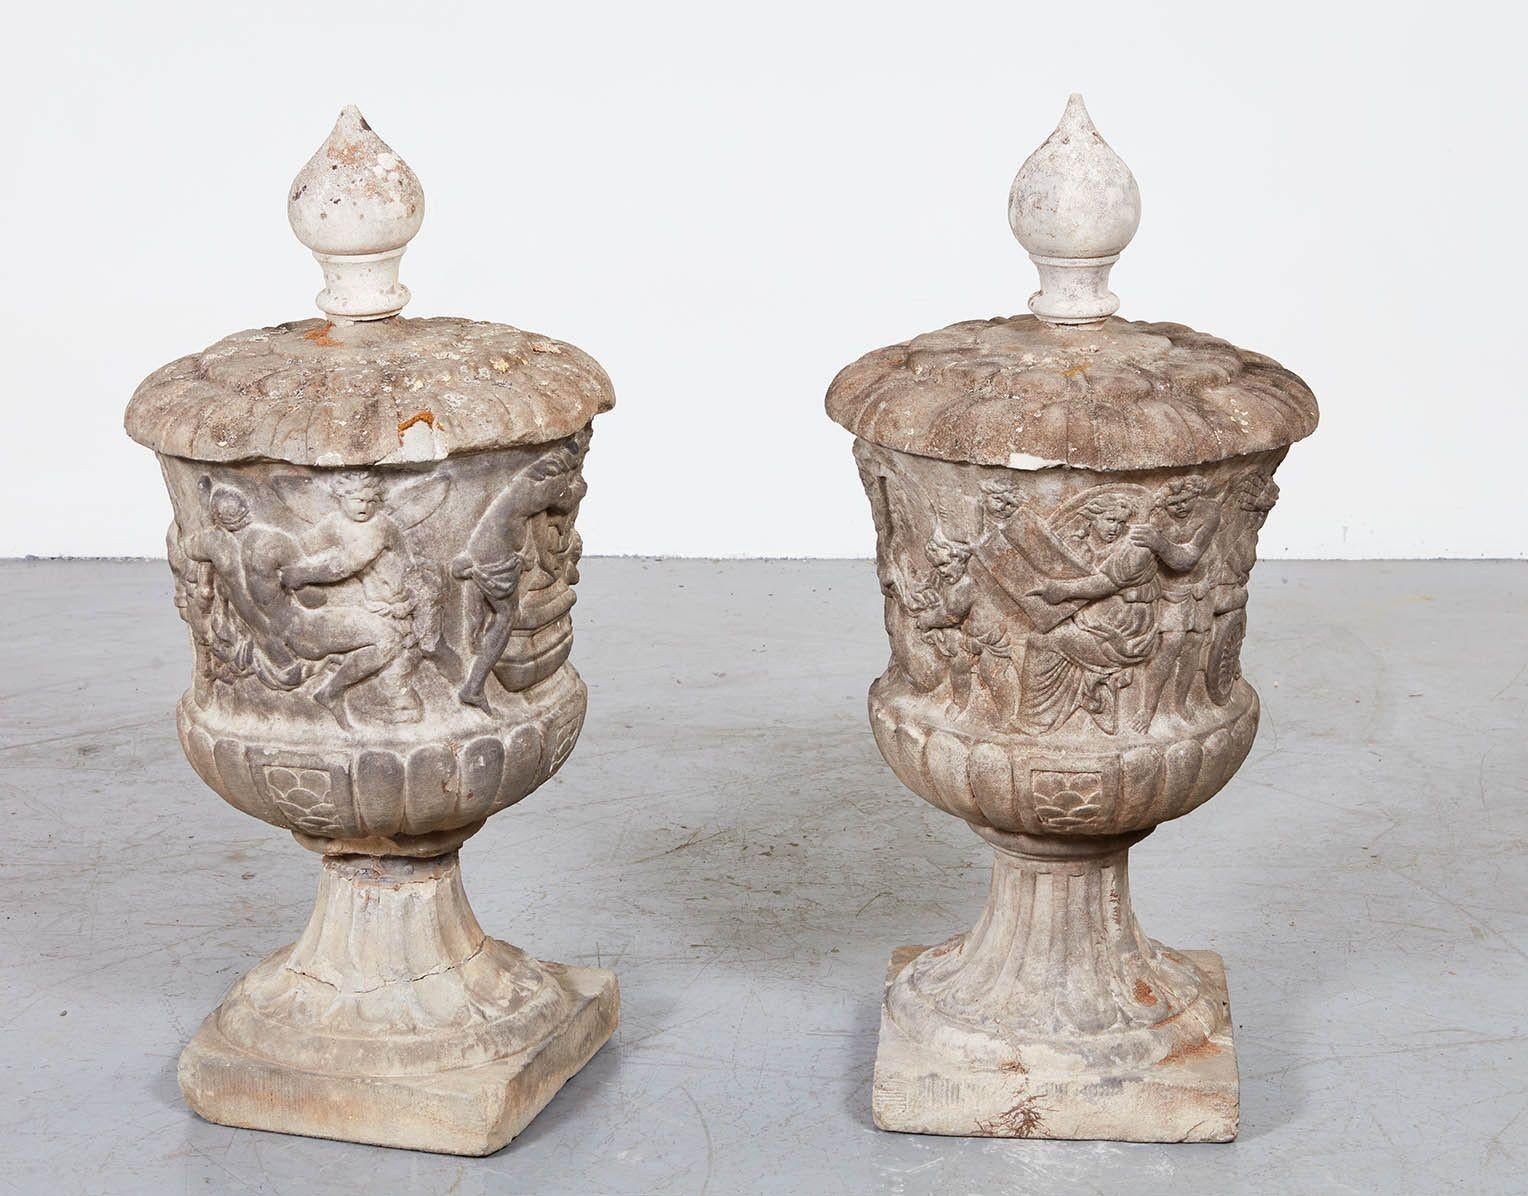 A rare and important pair of 17th century marble urns from the workshop of Jan Pieter Van Baurscheit (1649-1728), the body carved with mythological scenes carved in bas relief with gardrooning and scale carving on a square base, with later